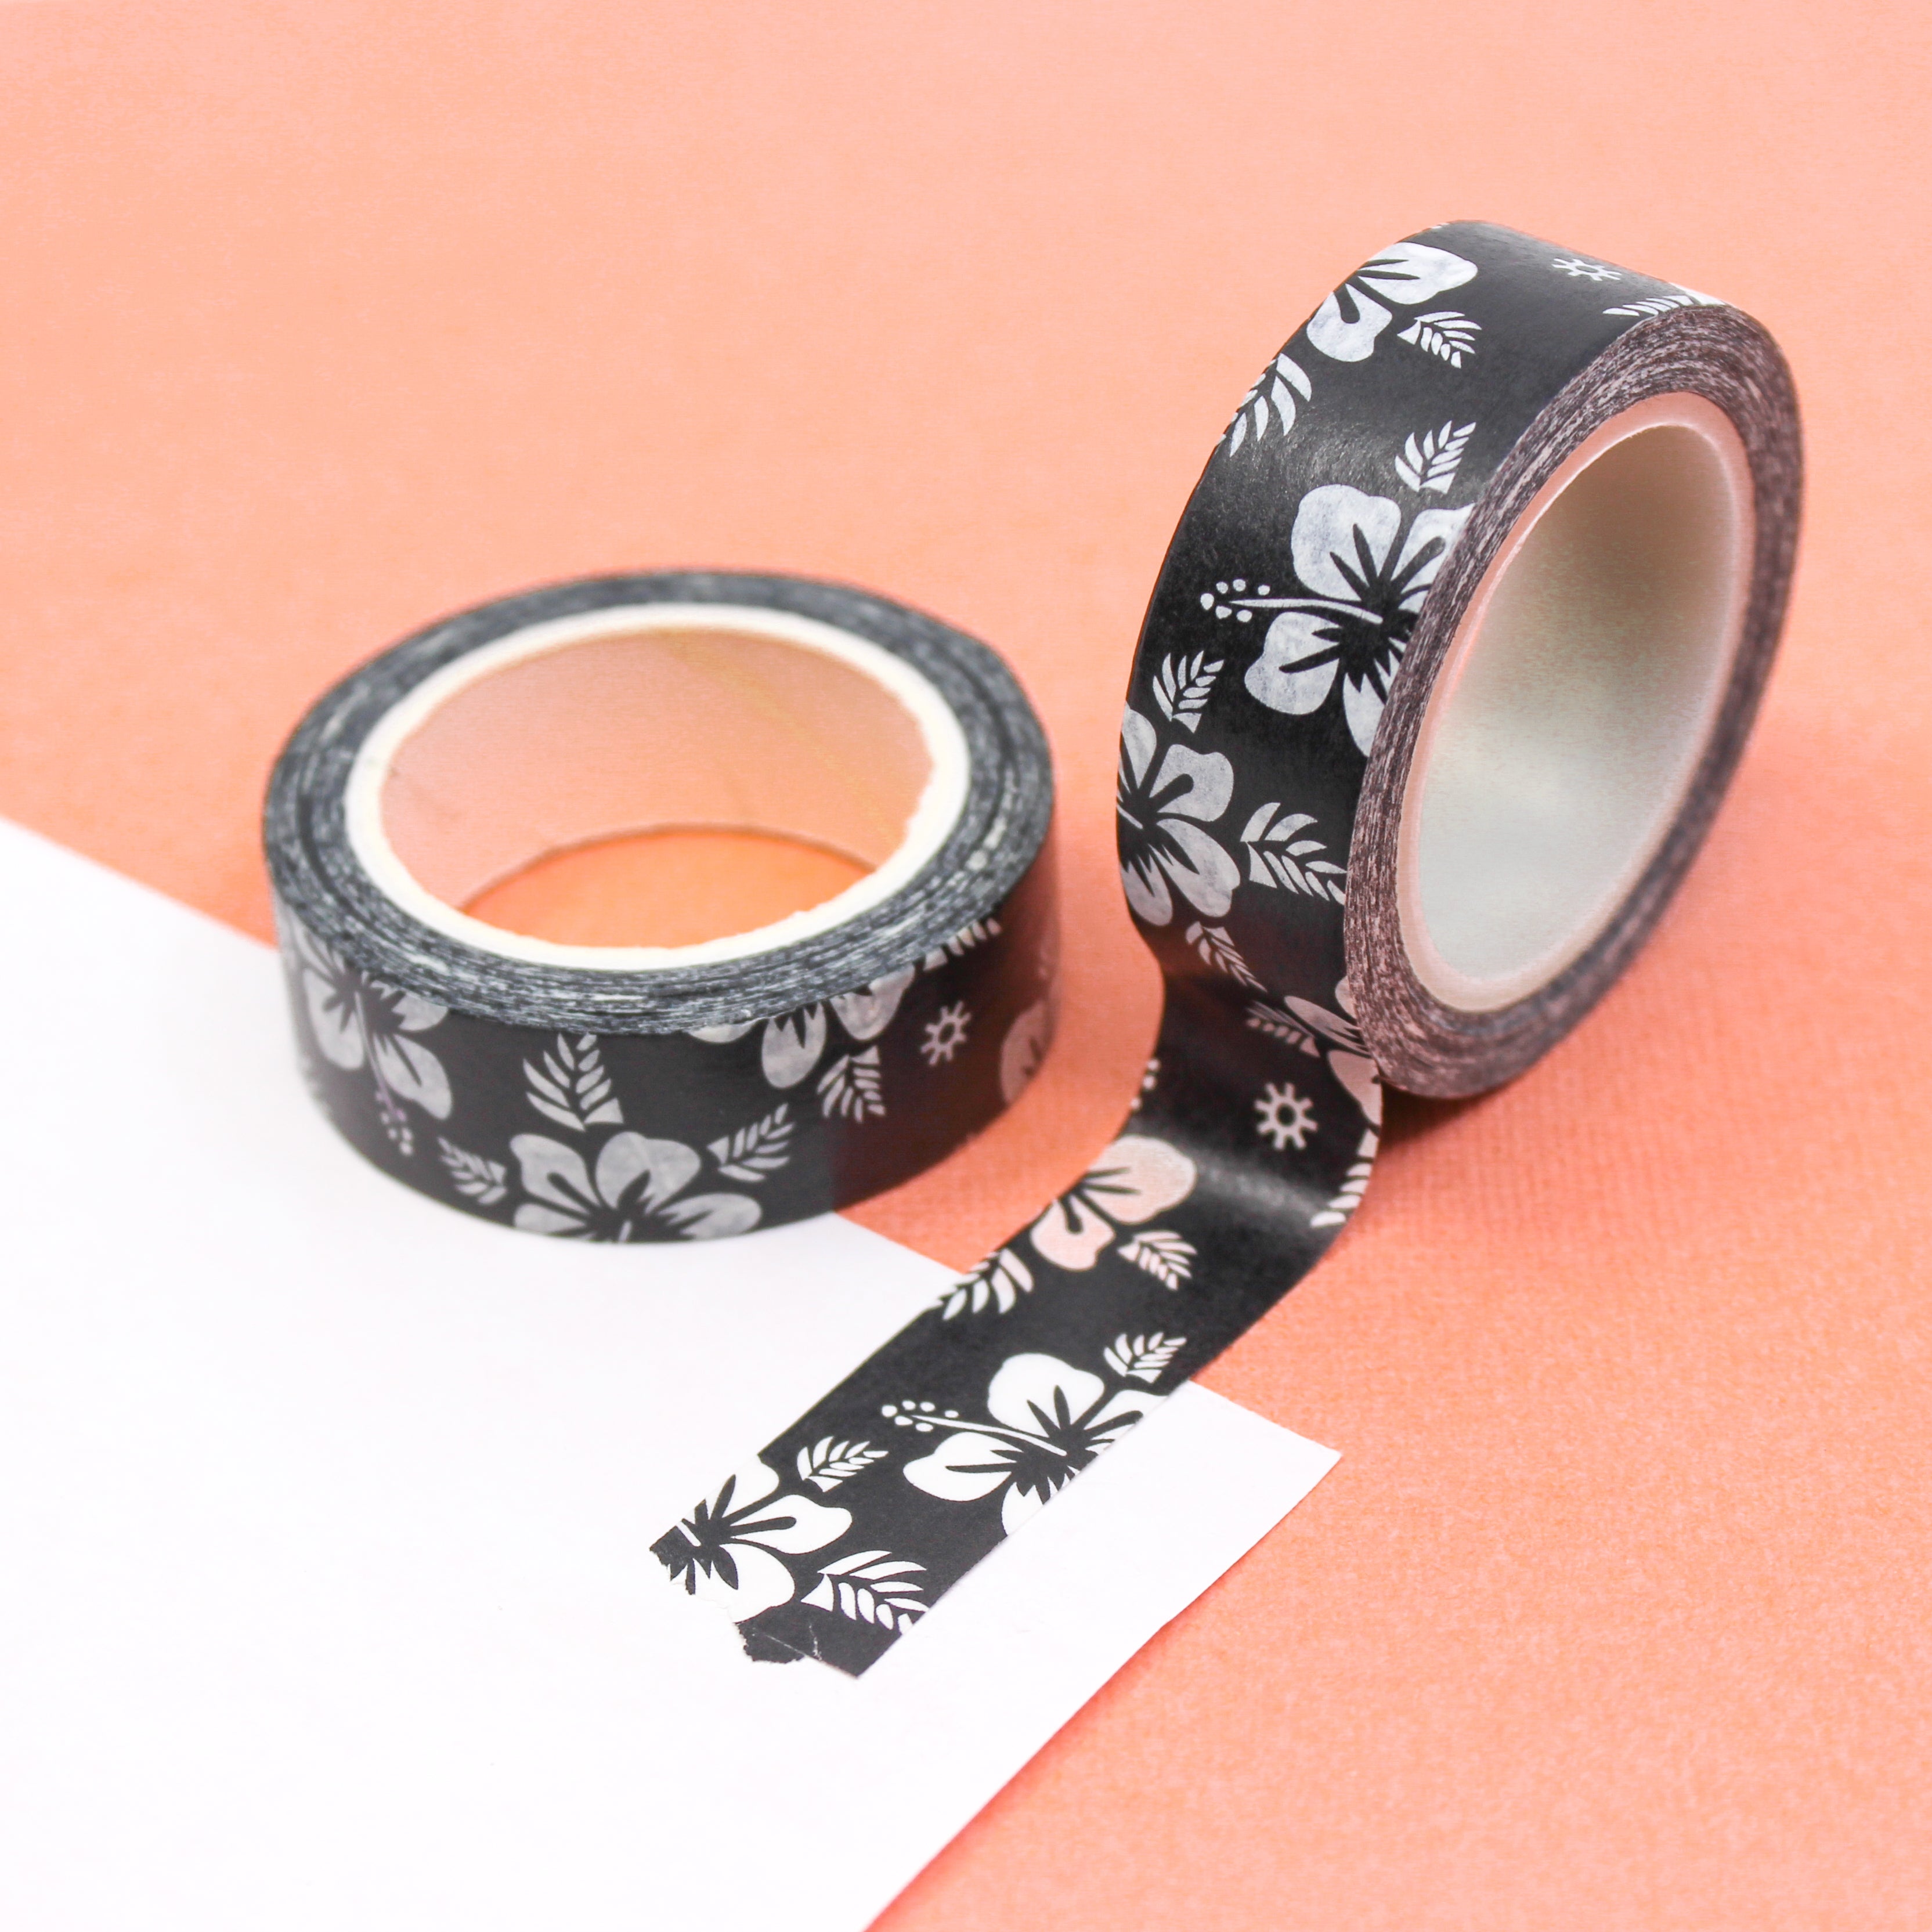 Infuse your crafts with a touch of tropical allure using our black and white tropical hibiscus pattern floral washi tape, featuring exquisite hibiscus flowers in a striking black and white color scheme. This tape is sold at BBB Supplies Craft Shop.